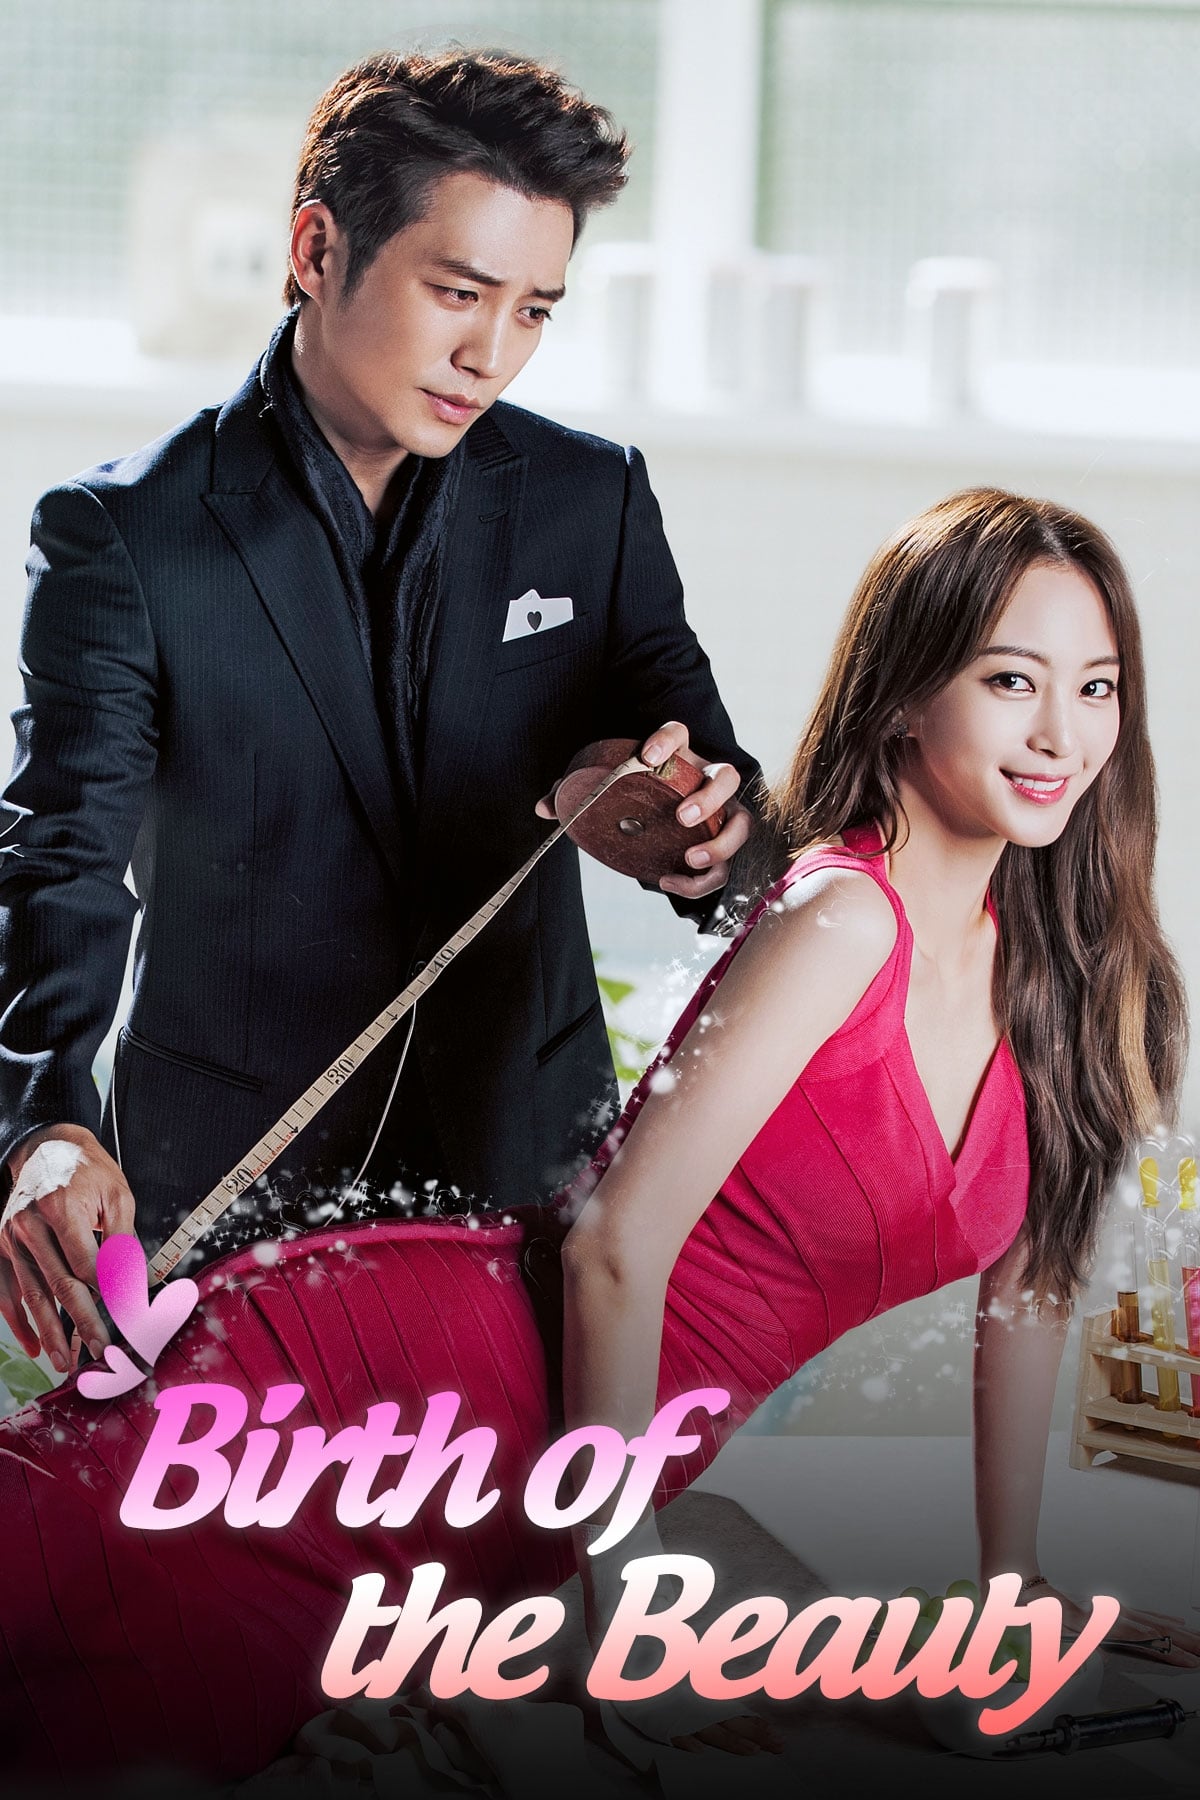 Birth of a beauty episode 1 Episodes 1-4 of the Korean drama series, (Season 1) Hindi Dubbed (ORG) WEB-DL 1080p 720p 480p HD, have been added.